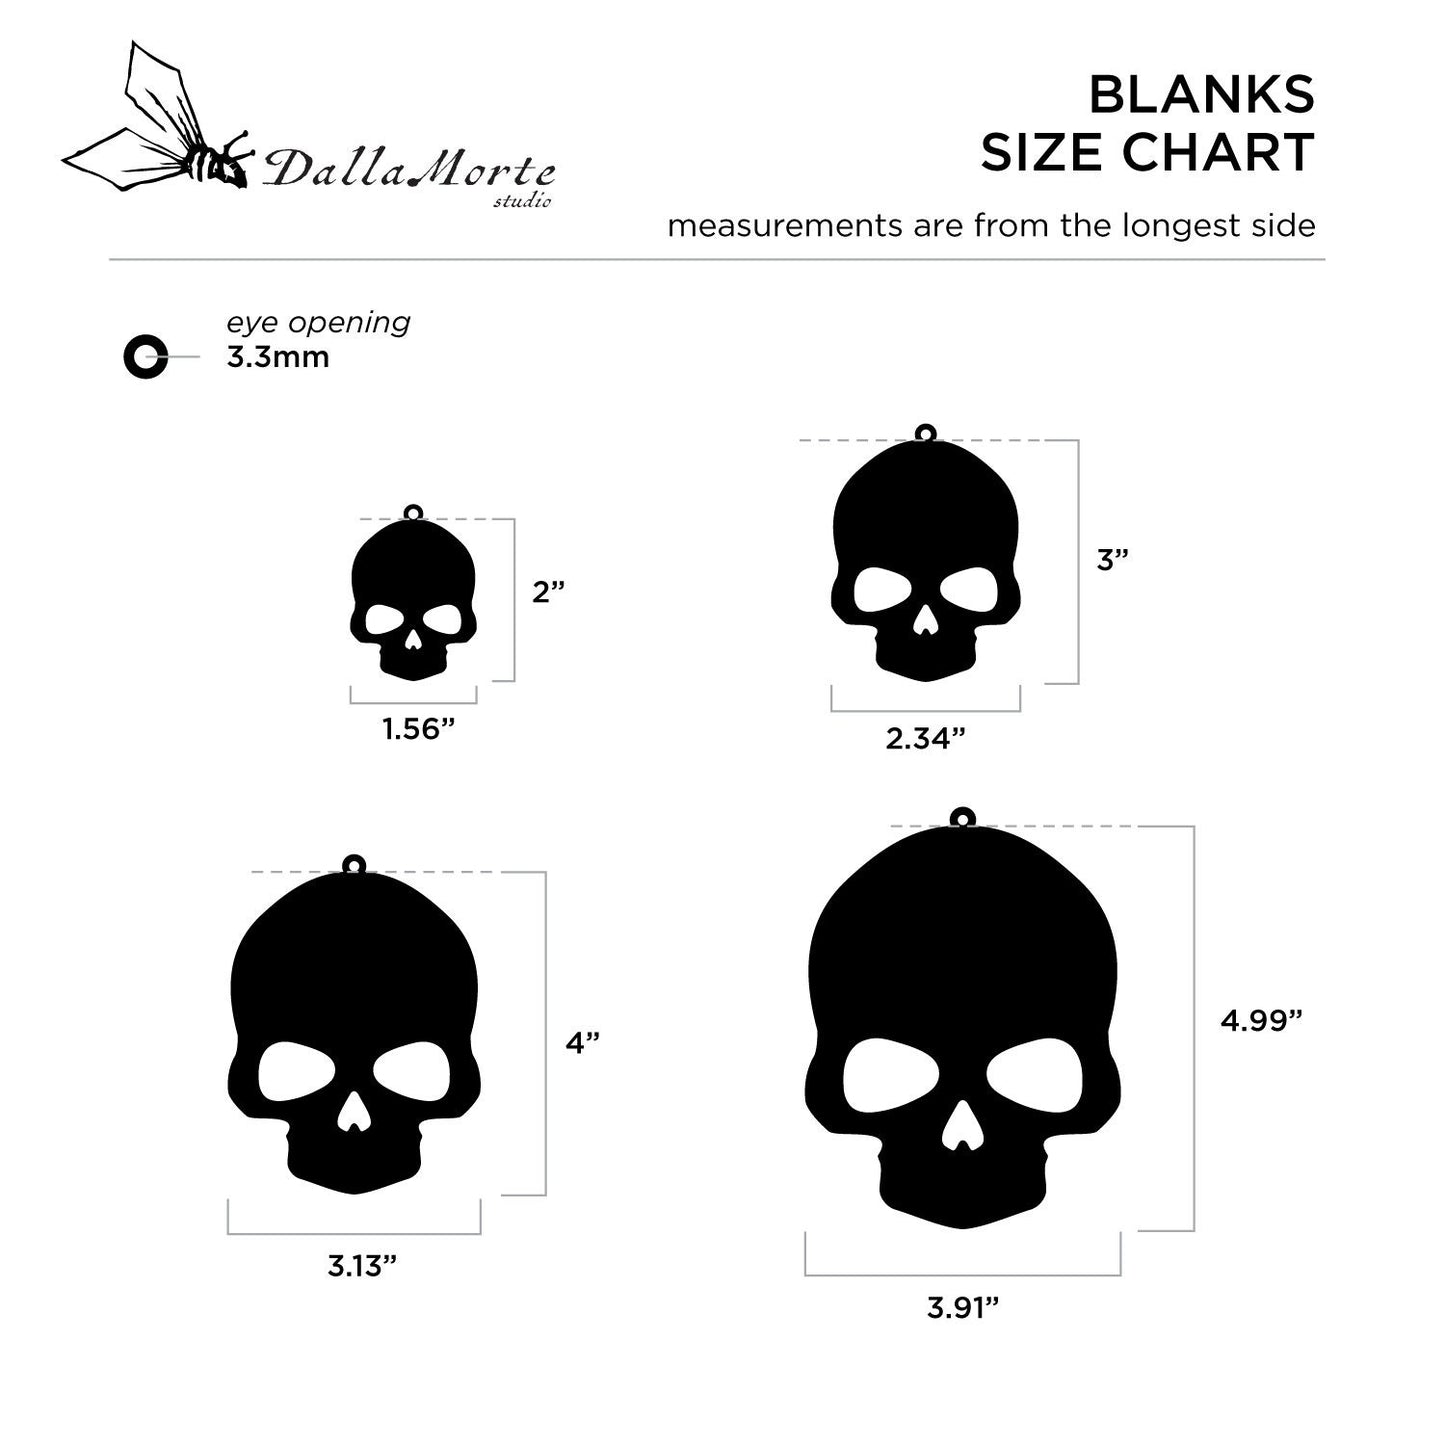 Skull Five (5) Pack Blank Acrylic Shape Ornaments for Holidays and Events